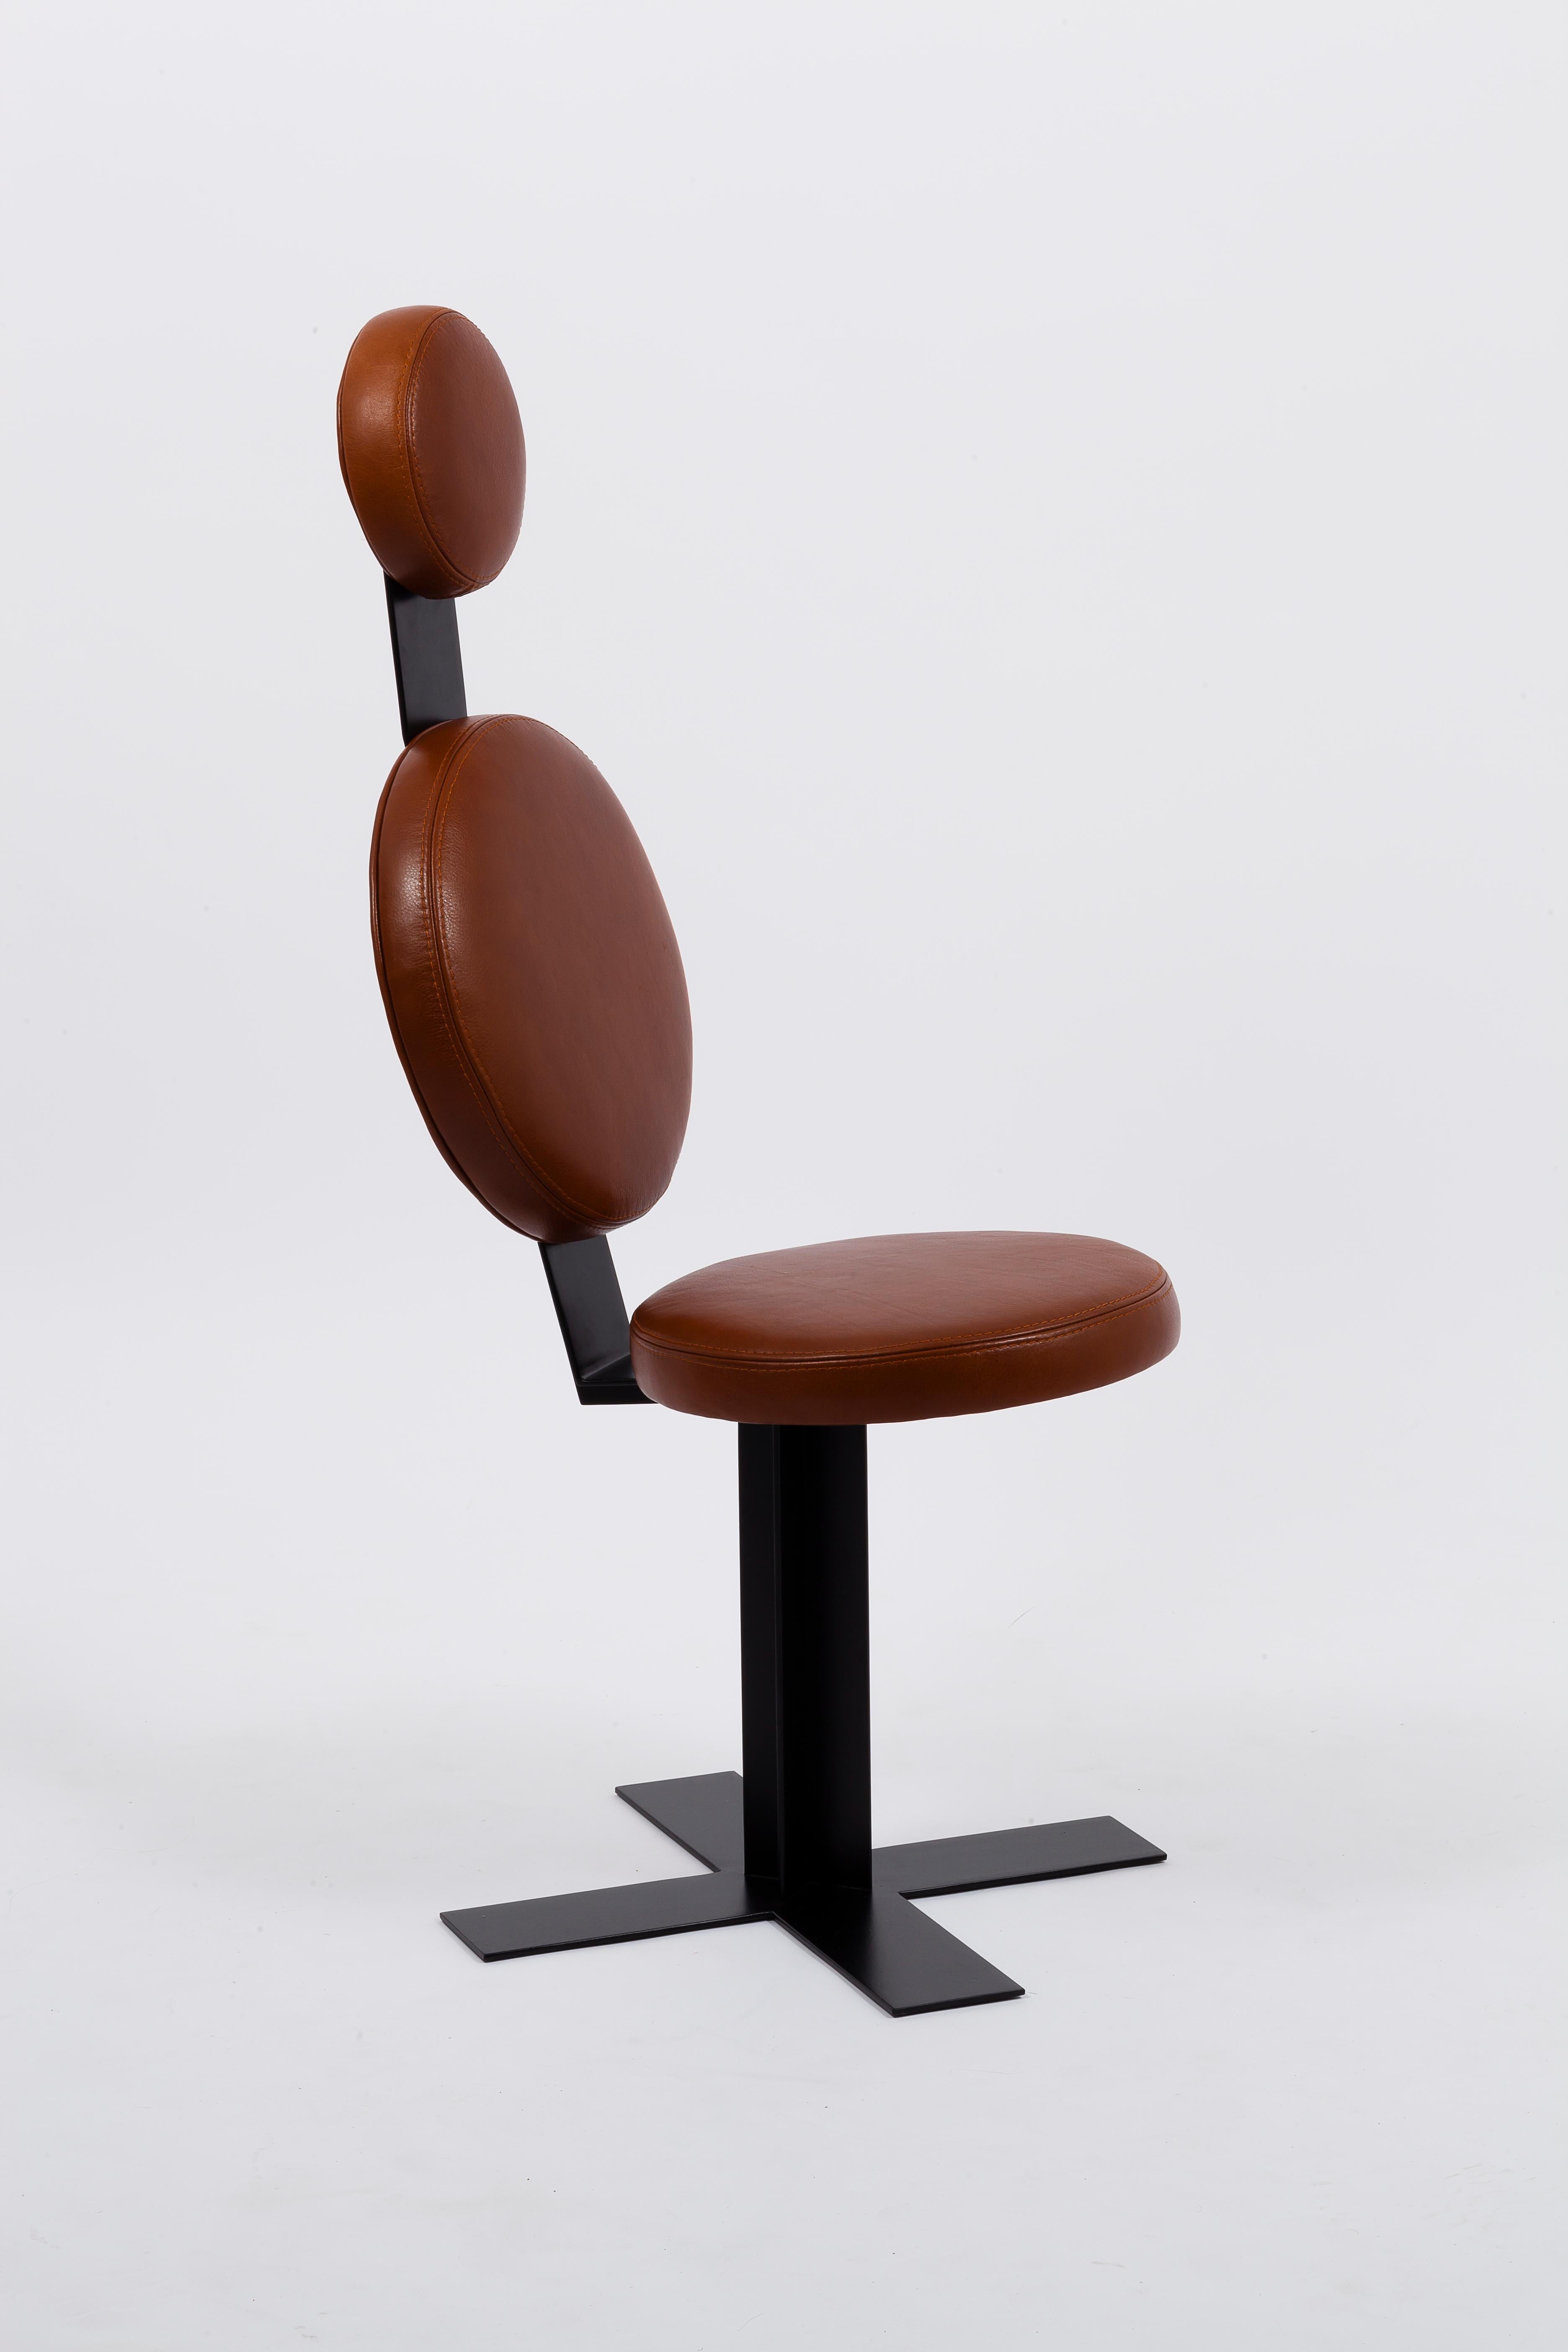 Hand-Crafted Leather and Steel Mid-Century Modern Designer Office Chair For Sale